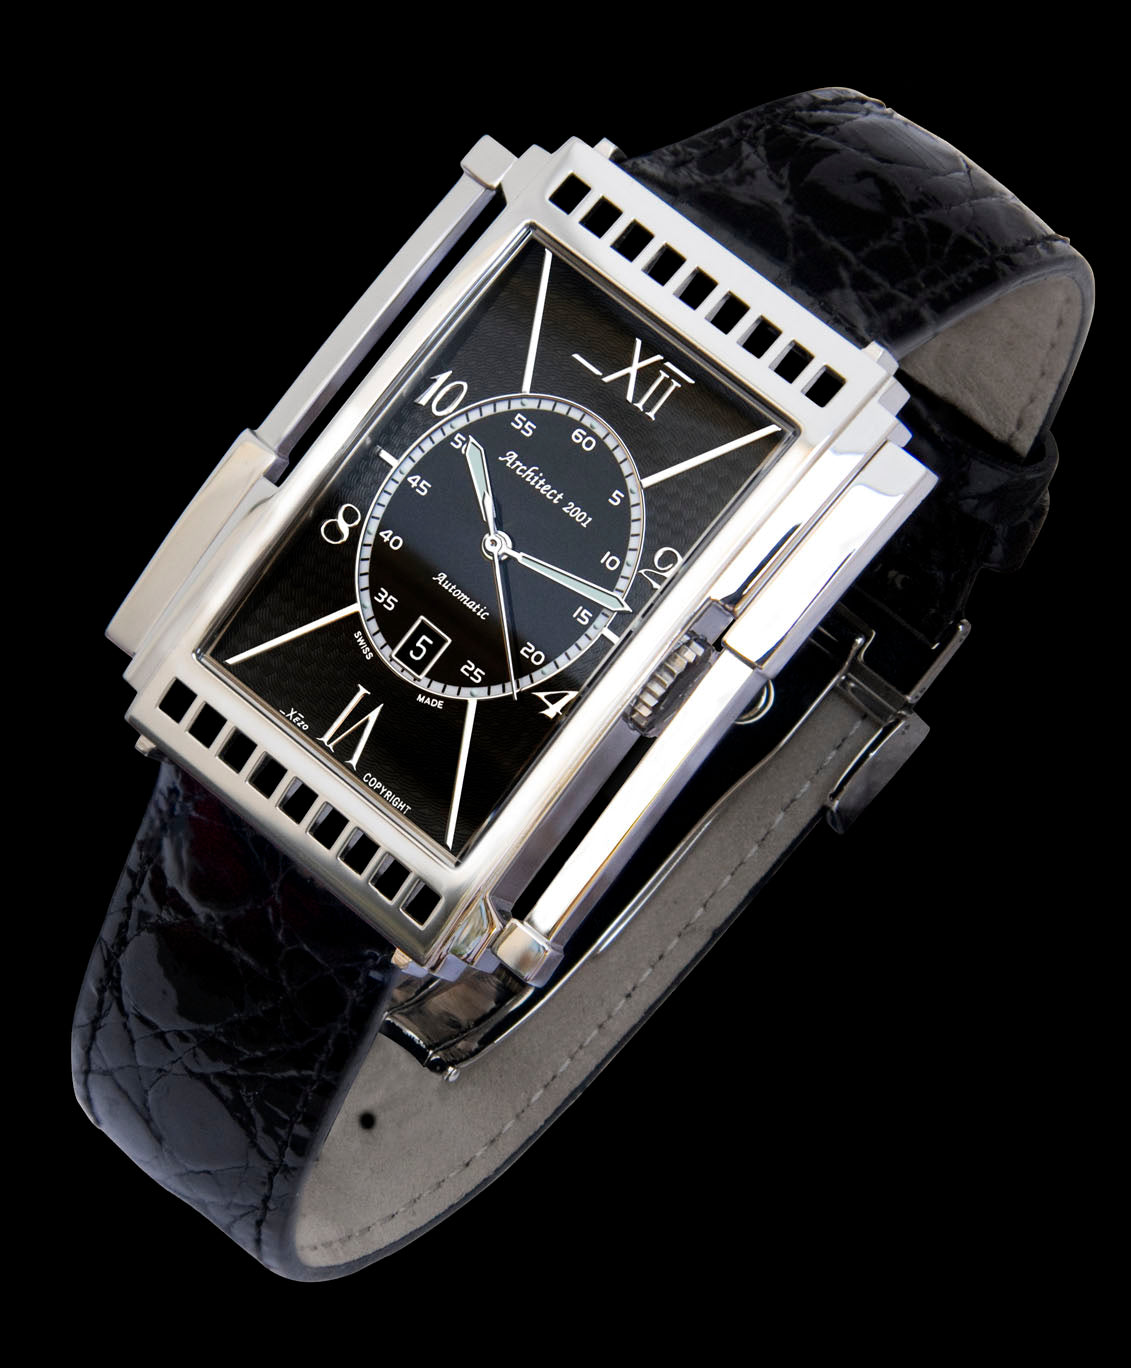 Xezo - Angled view of the front of the Architect 2001 BA Tank watch with black leather strap